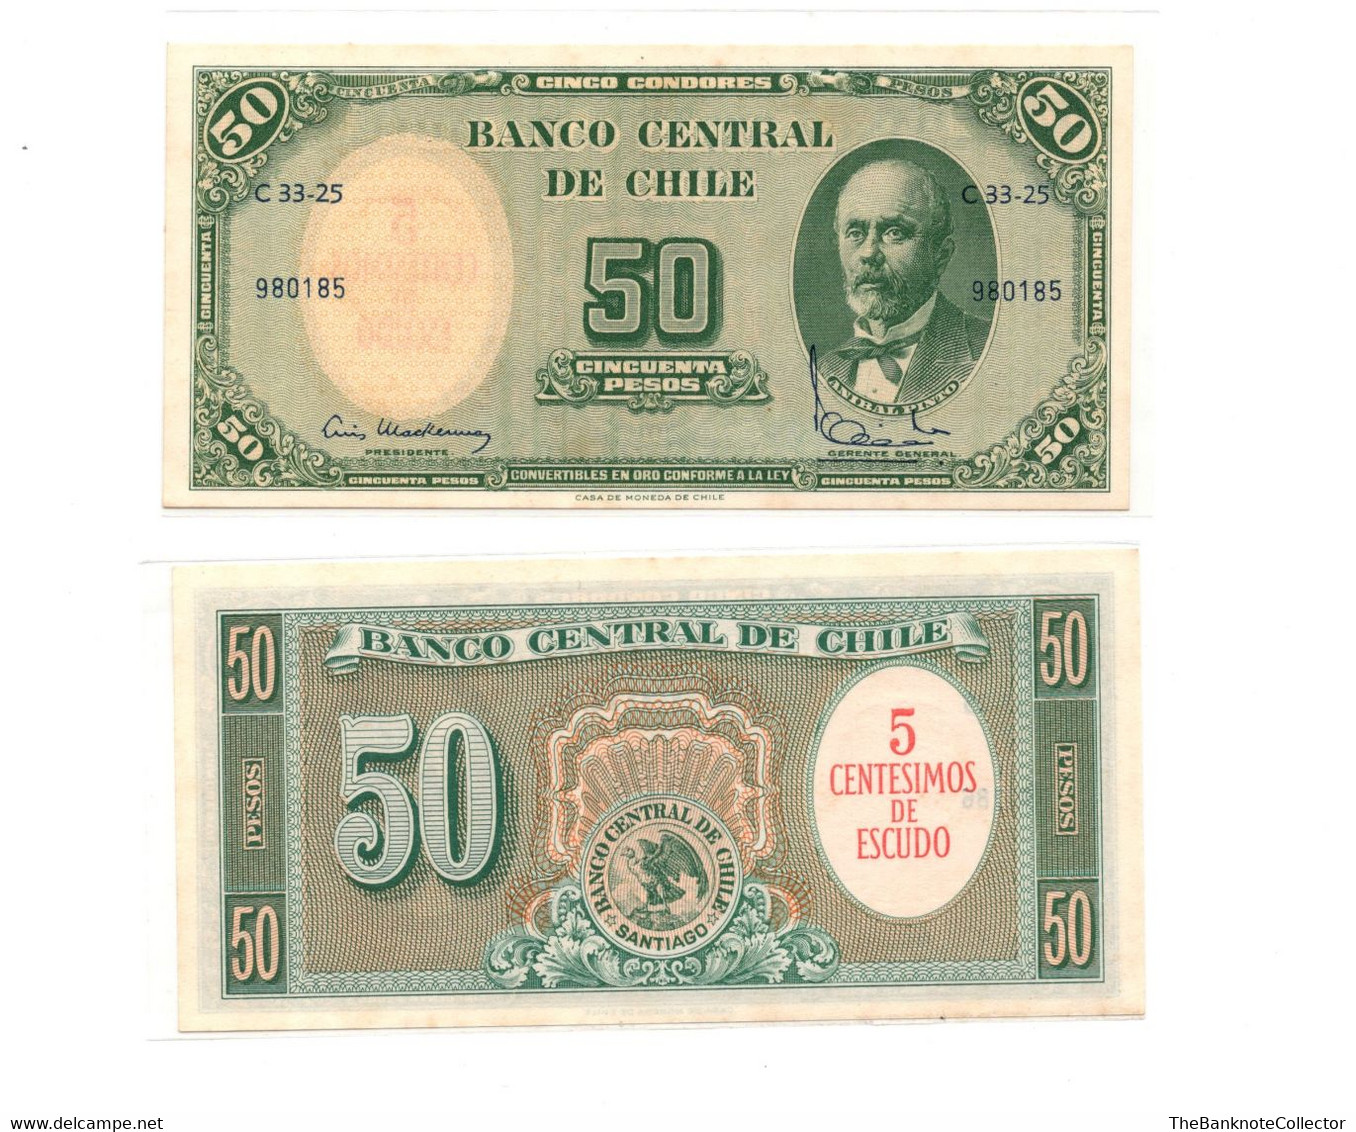 Chile 5 Centimos On 50 Escudos ND 1960 P-126 UNC Foxing - Chile